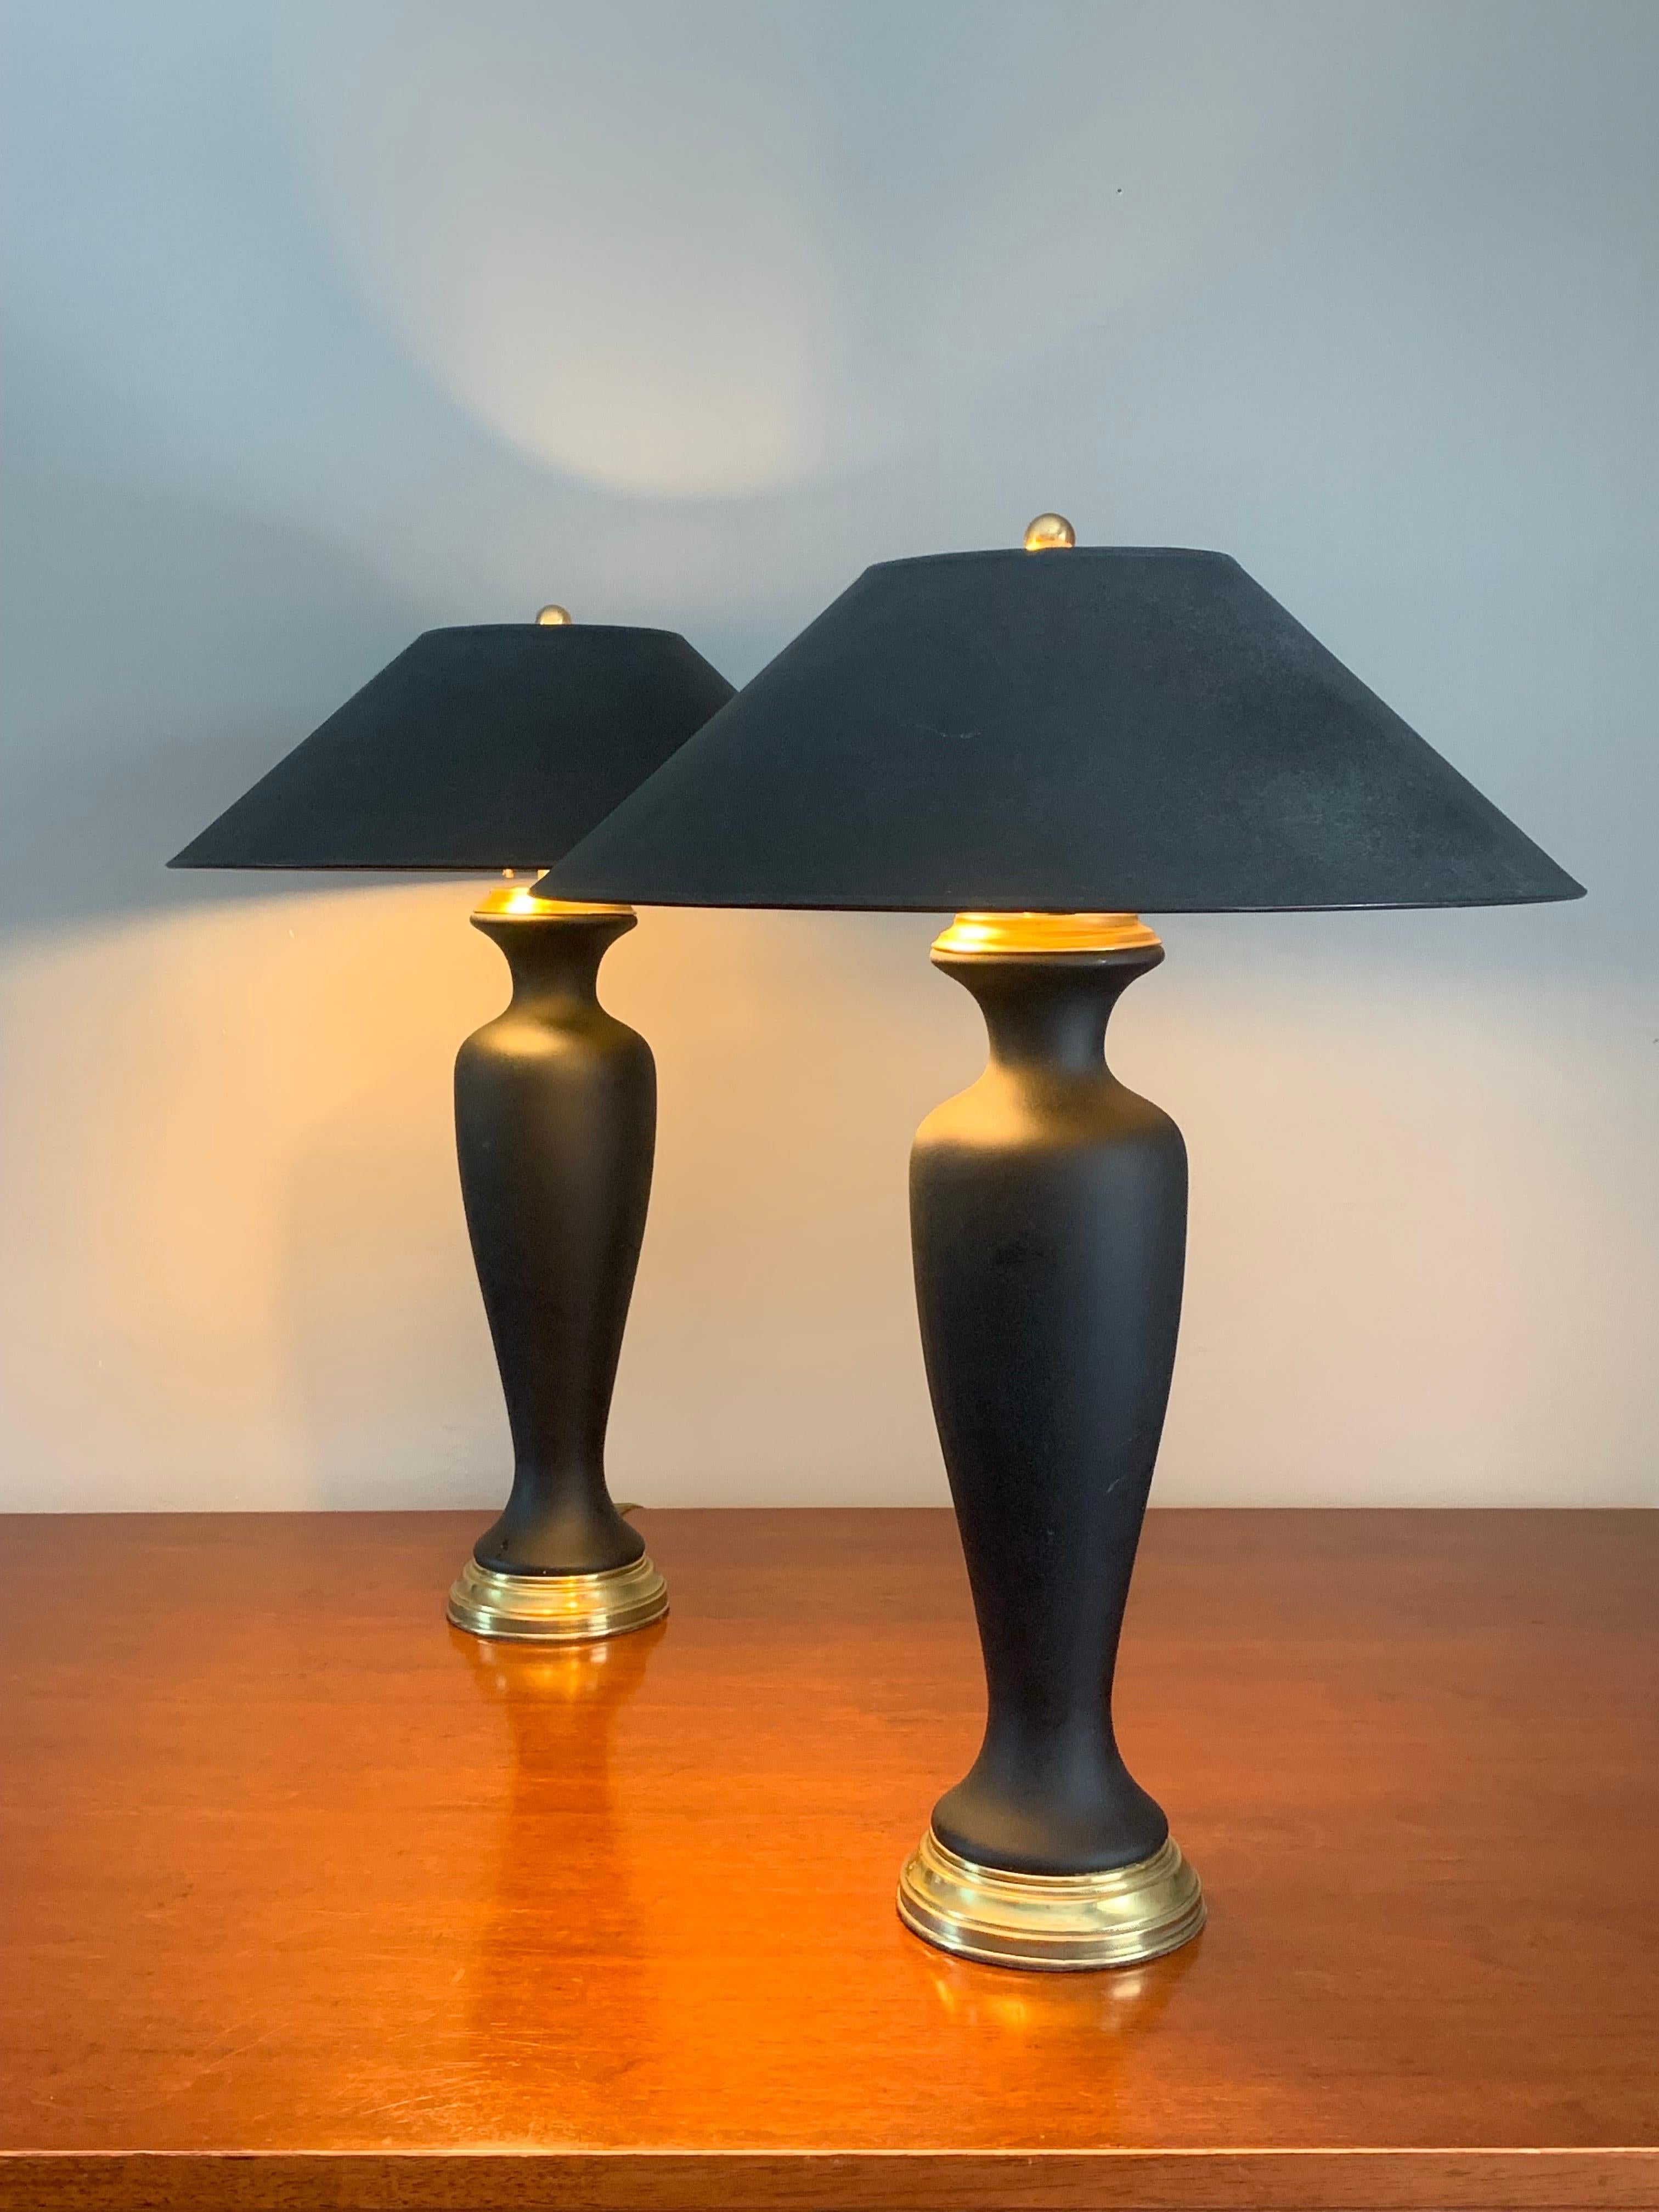 Fantastic pair of Lamps. By Frederick Cooper for Tyndale of Chicago. Frosted black finish that matches base with shades. Full brass hardware and finial. 

Lamp bases are 6” x 6” x 27.5” 

Shades are 20” x 6.5”